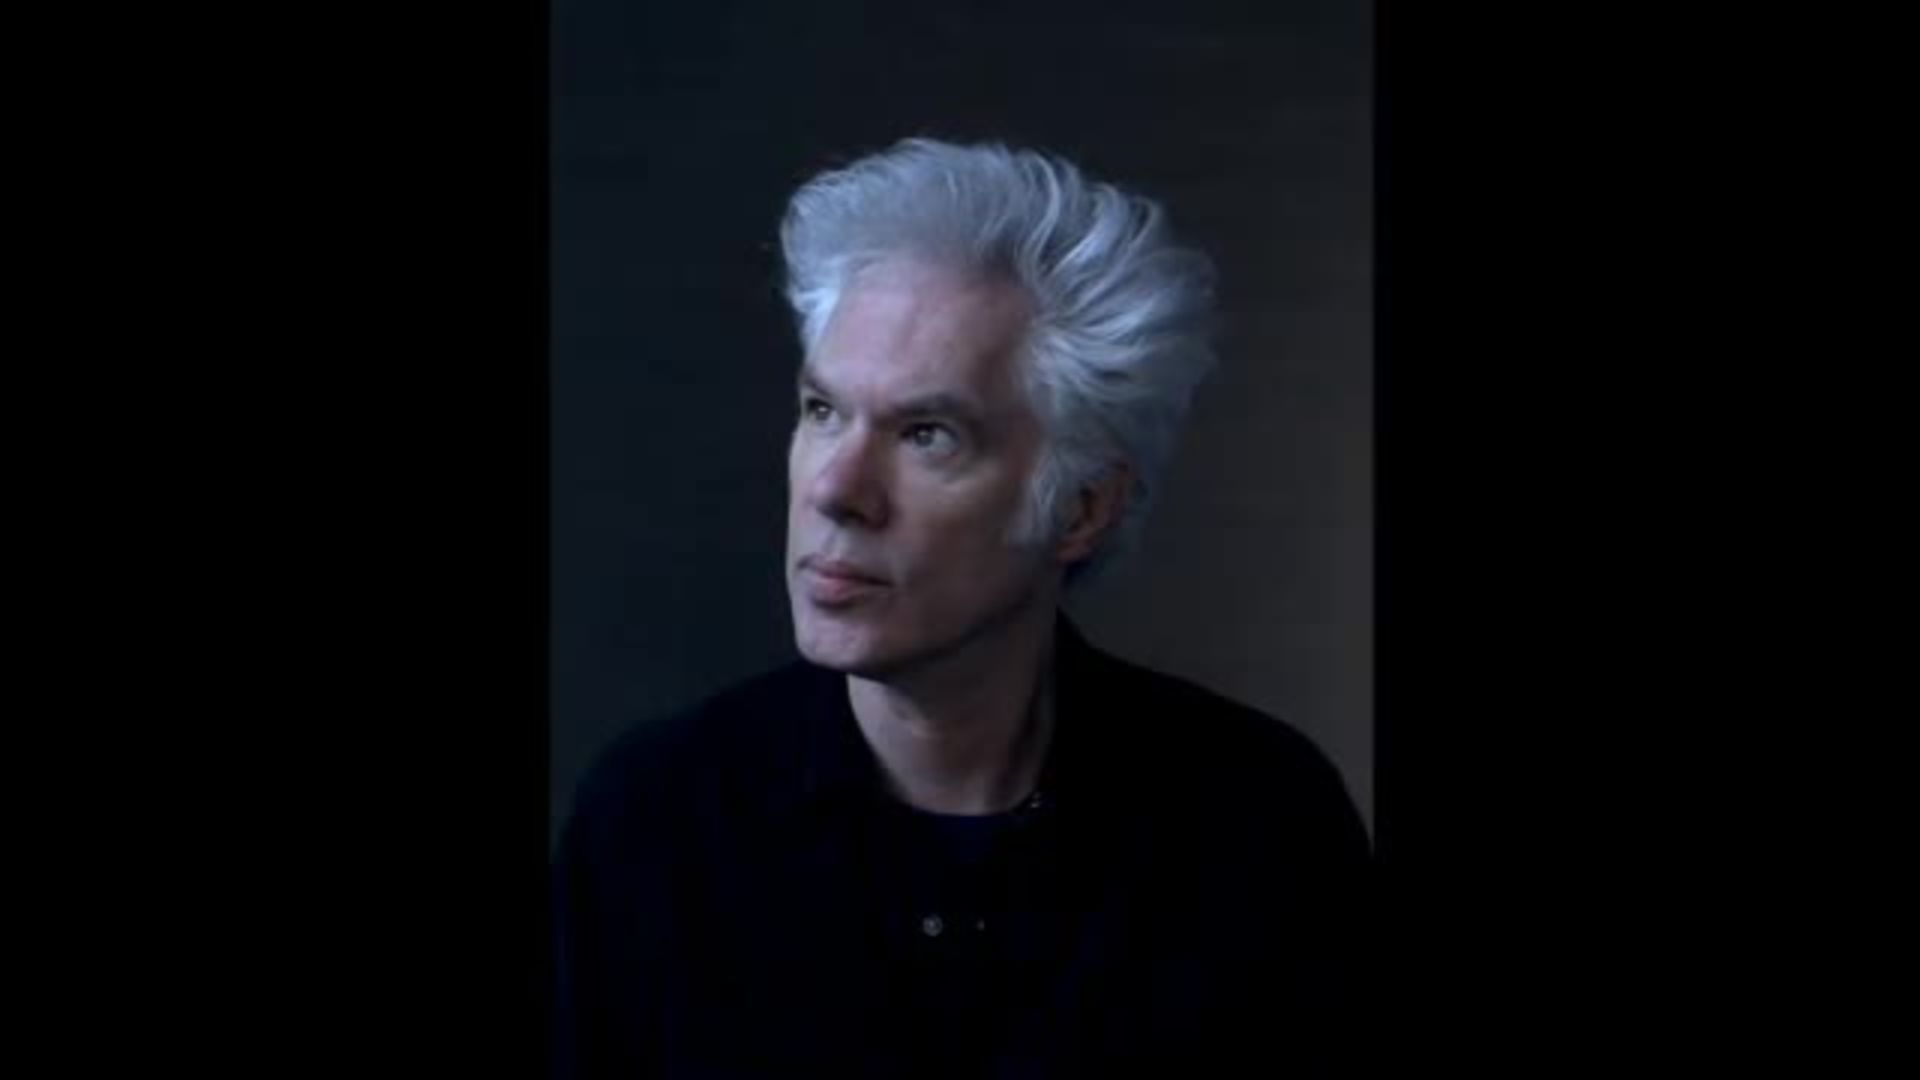 Nares Hd Porn - Watch See James Nares's Ultra High-Definition Portrait of Jim Jarmusch |  Exclusives | Vanity Fair